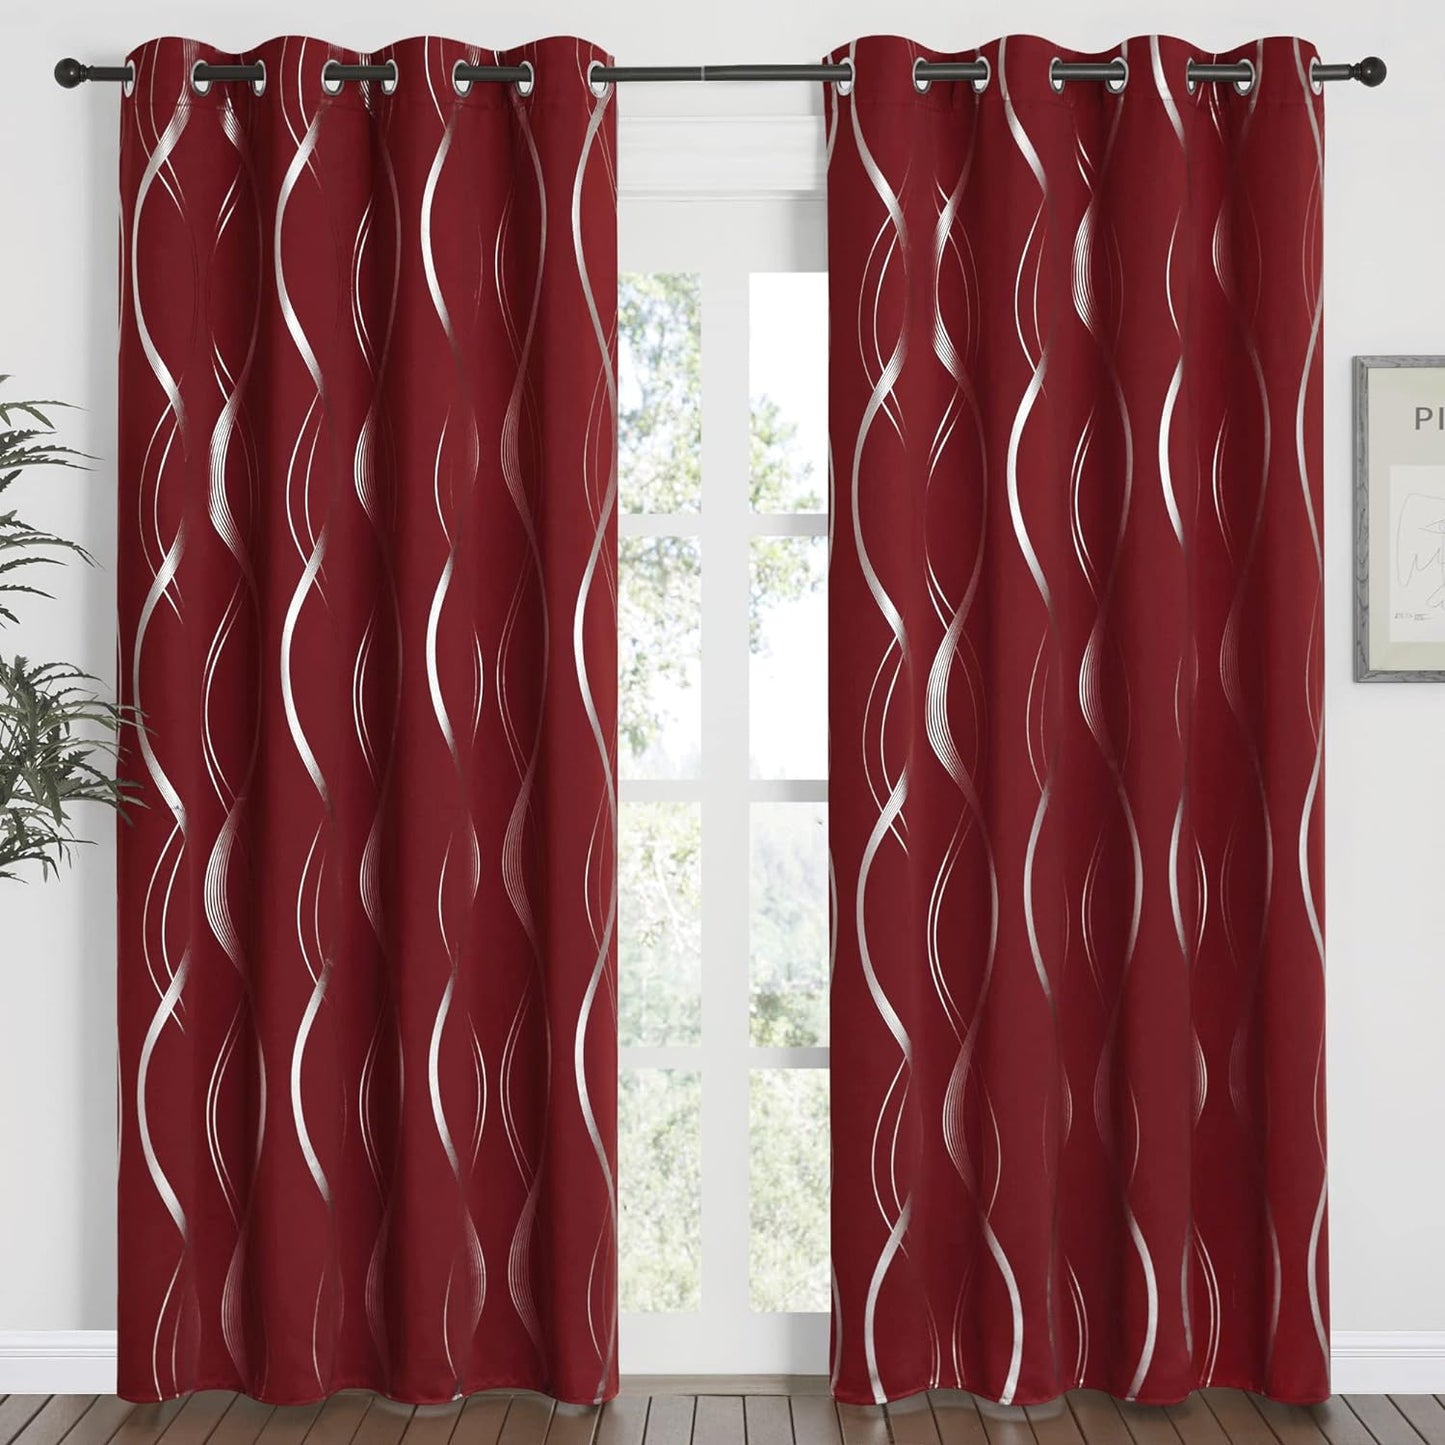 NICETOWN Grey Blackout Curtains 84 Inch Length 2 Panels Set for Bedroom/Living Room, Noise Reducing Thermal Insulated Wave Line Foil Print Drapes for Patio Sliding Glass Door (52 X 84, Gray)  NICETOWN Burgundy Red 52"W X 84"L 